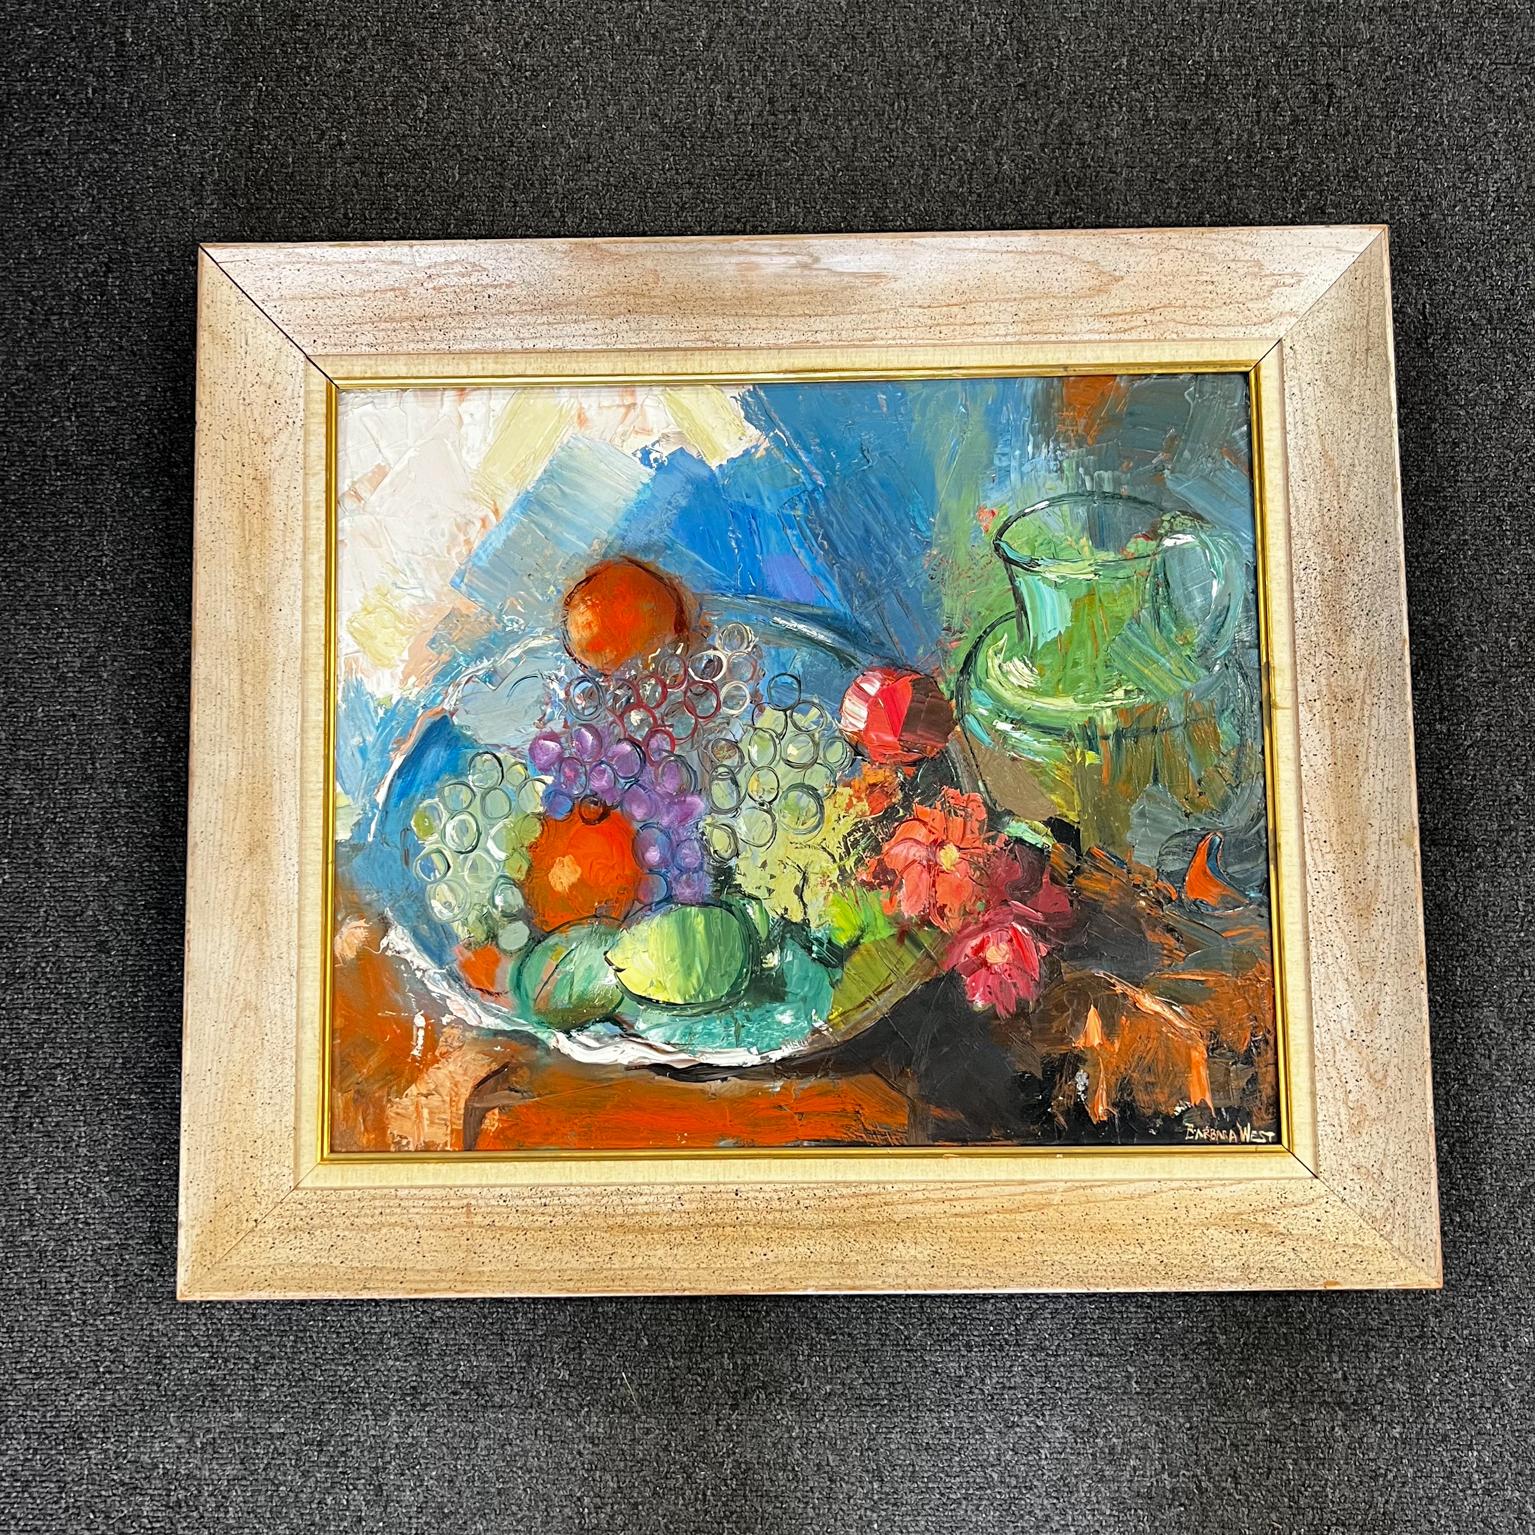 Artist Barbara West, The Green Jug 
Abstract still life 
Oil on Masonite board
Signed and framed.
29.38 w x 25.5 h x 2 d, art 23.5 x 19.5
Original vintage condition
See images please.